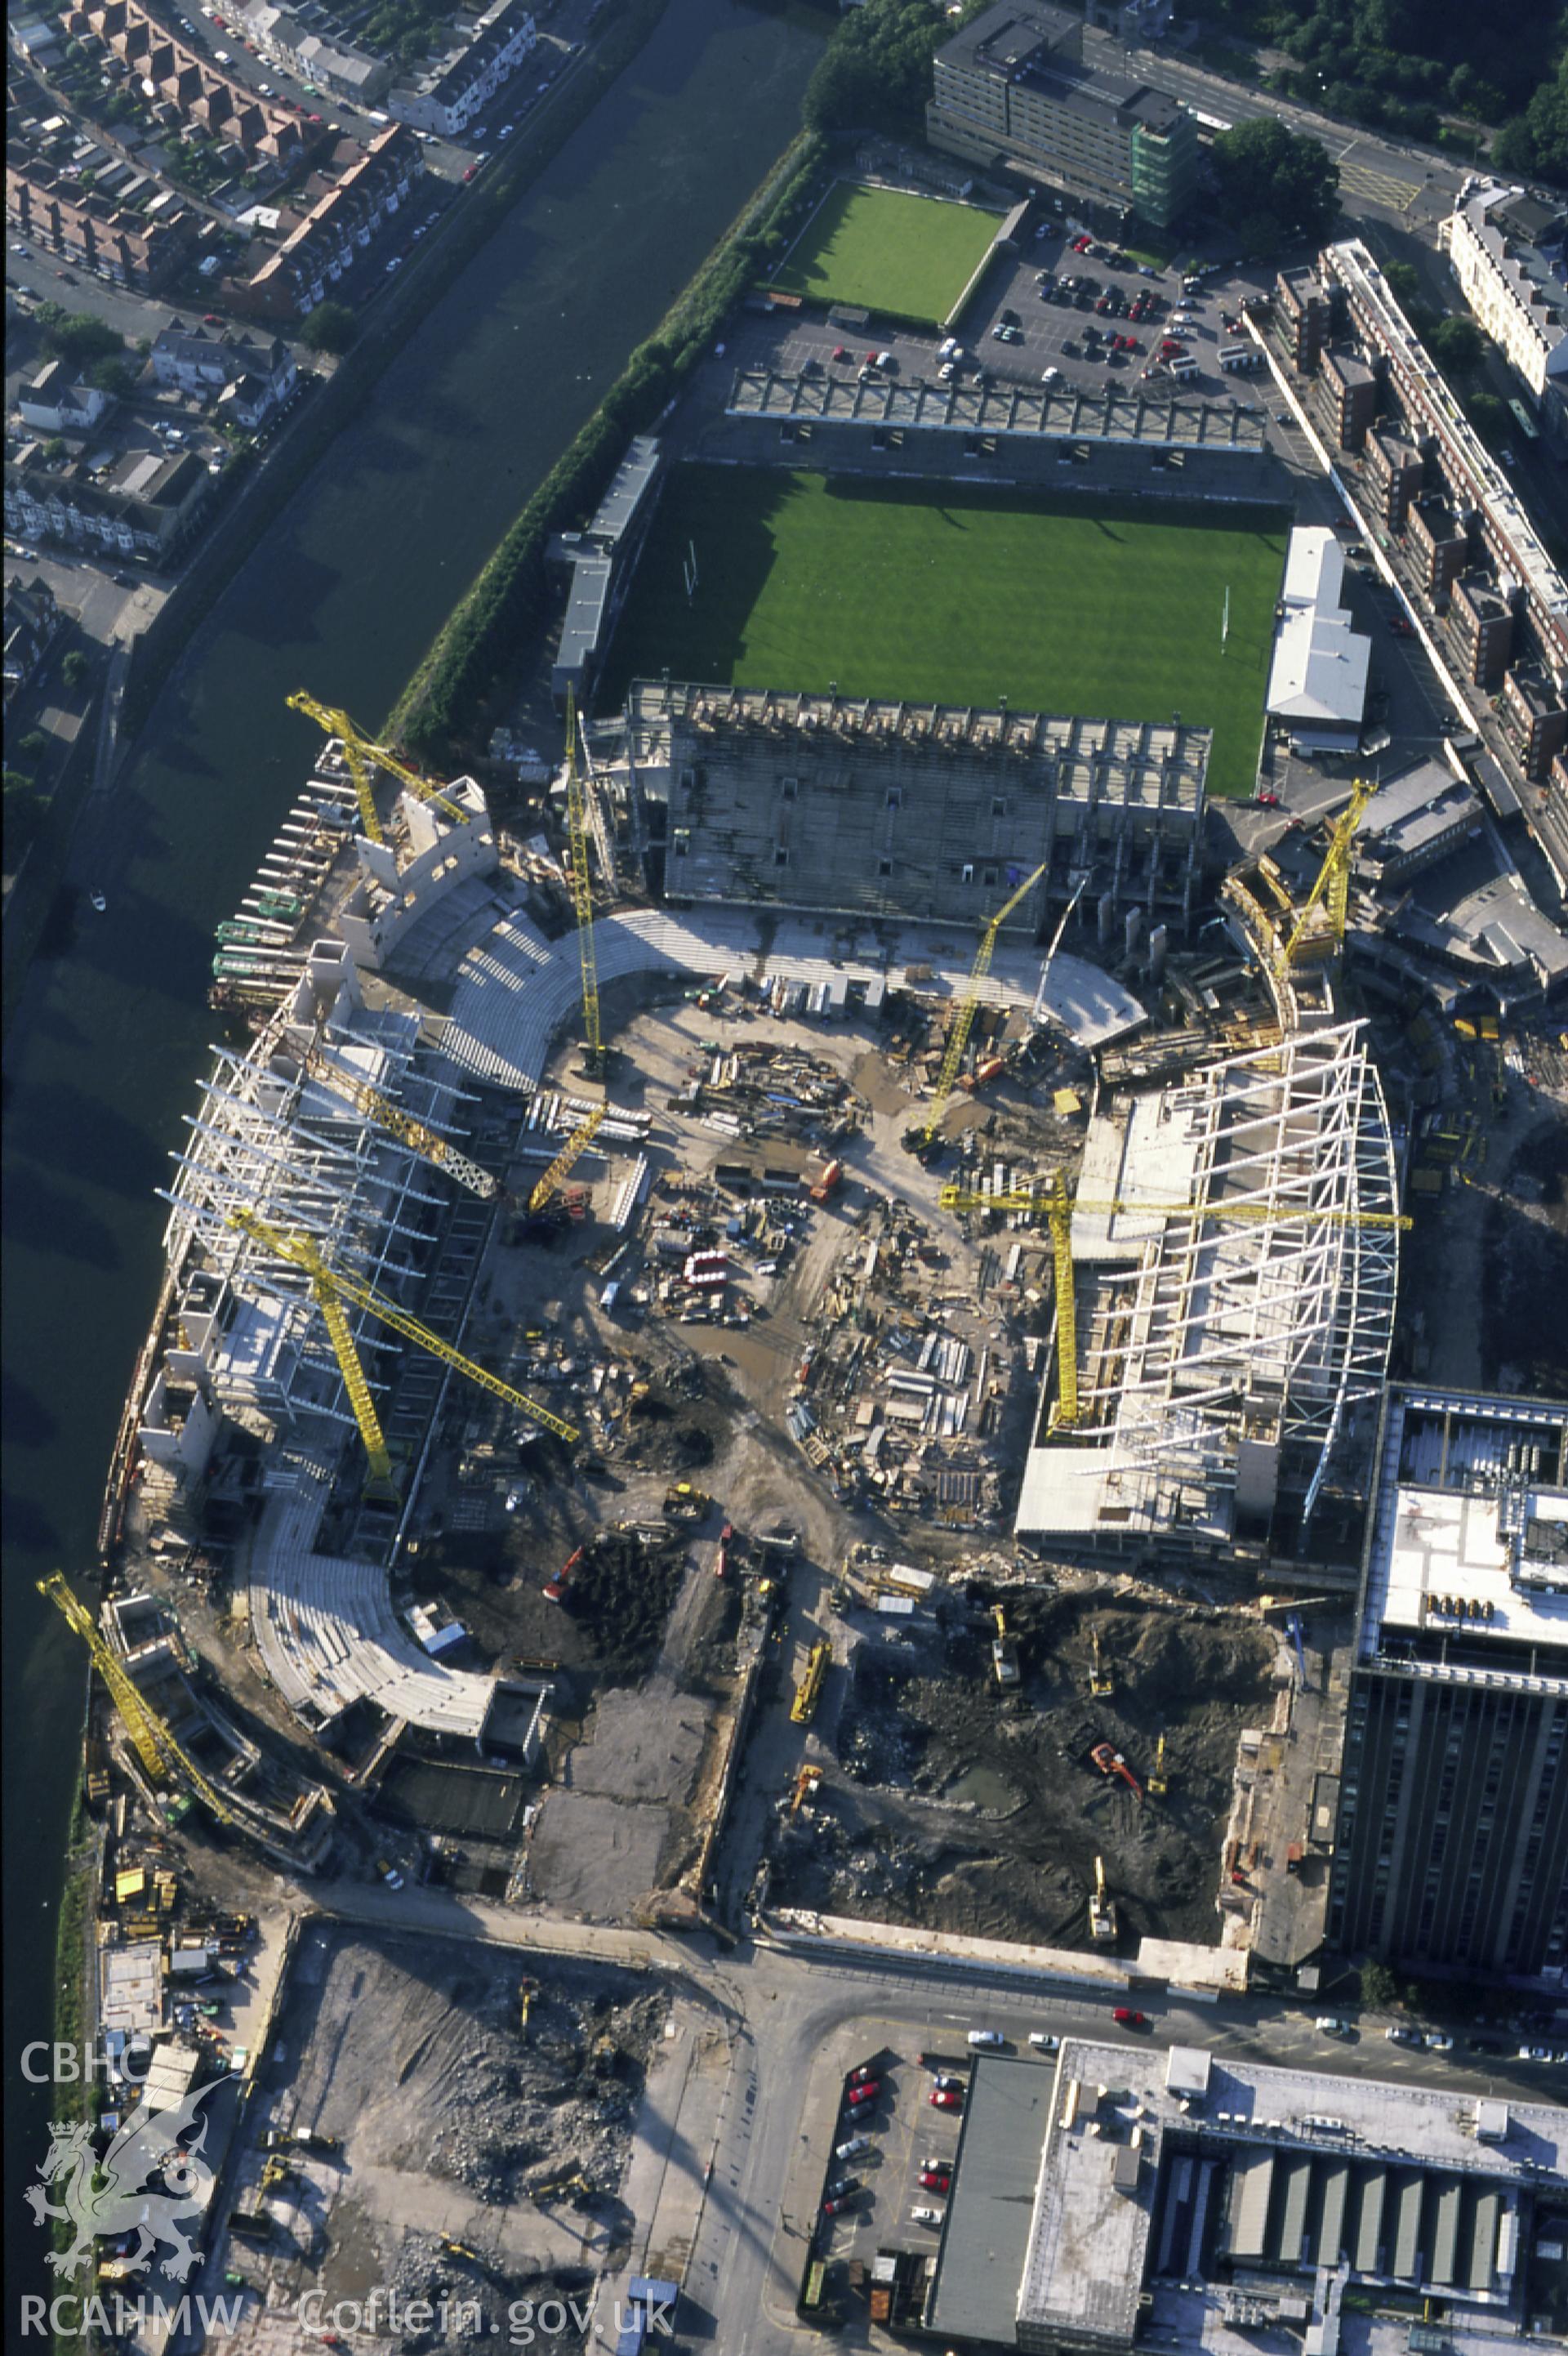 RCAHMW colour slide oblique aerial photograph of the Millennium Stadium in Cardiff, taken on 05/08/1998 by Toby Driver